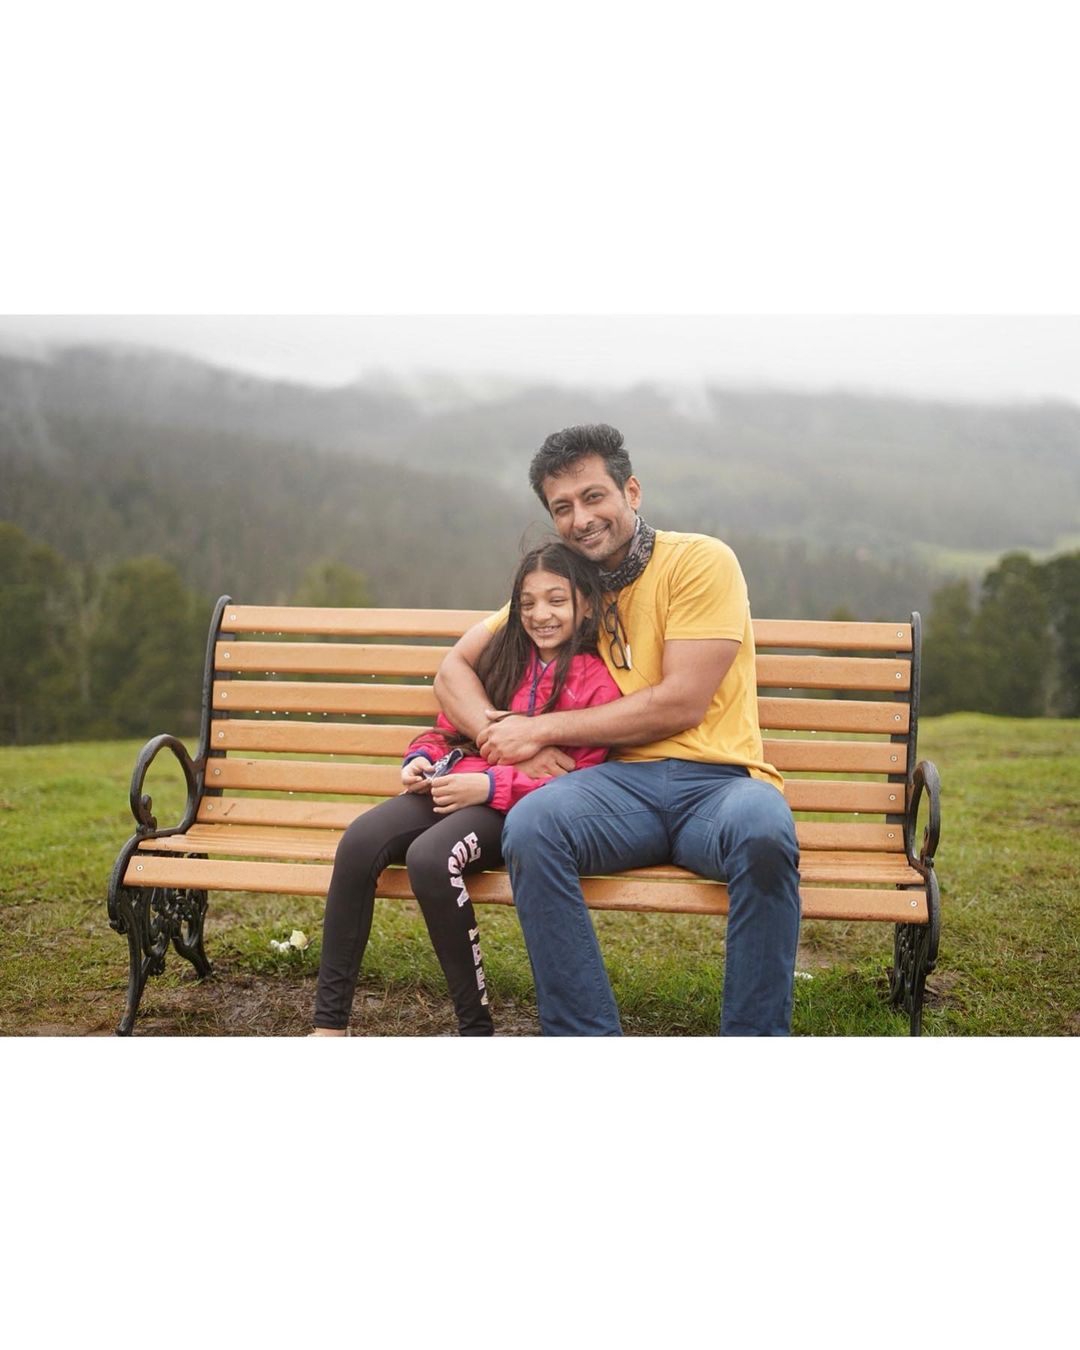 Indraneil Sengupta in the hill town of Ooty